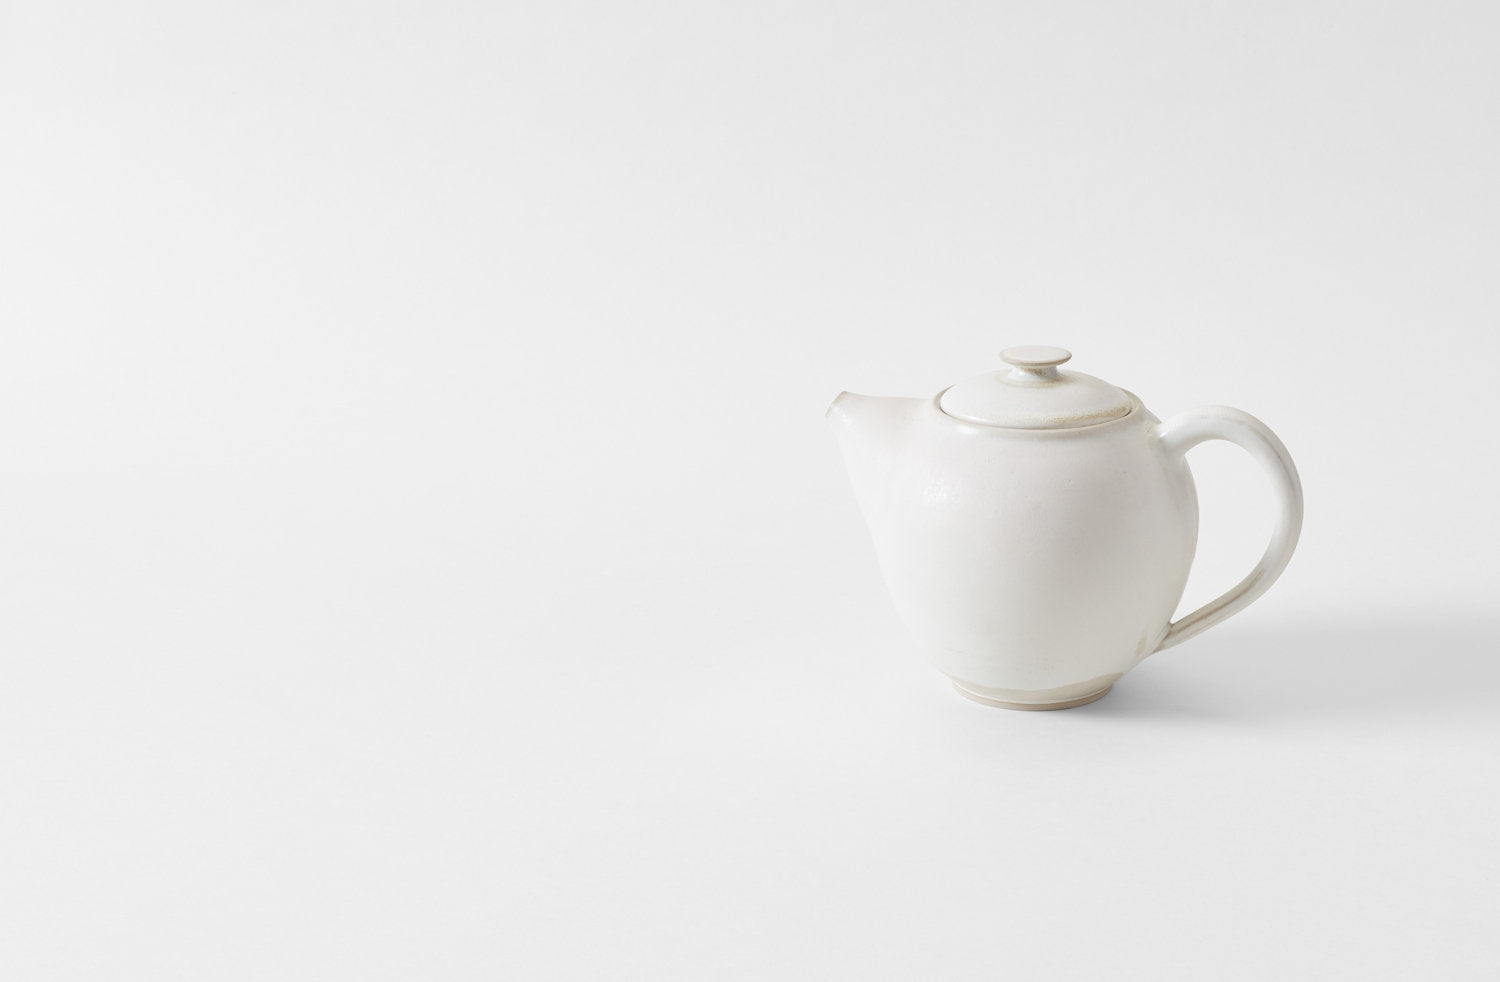 Beige Teapot - Large (OUT OF STOCK)